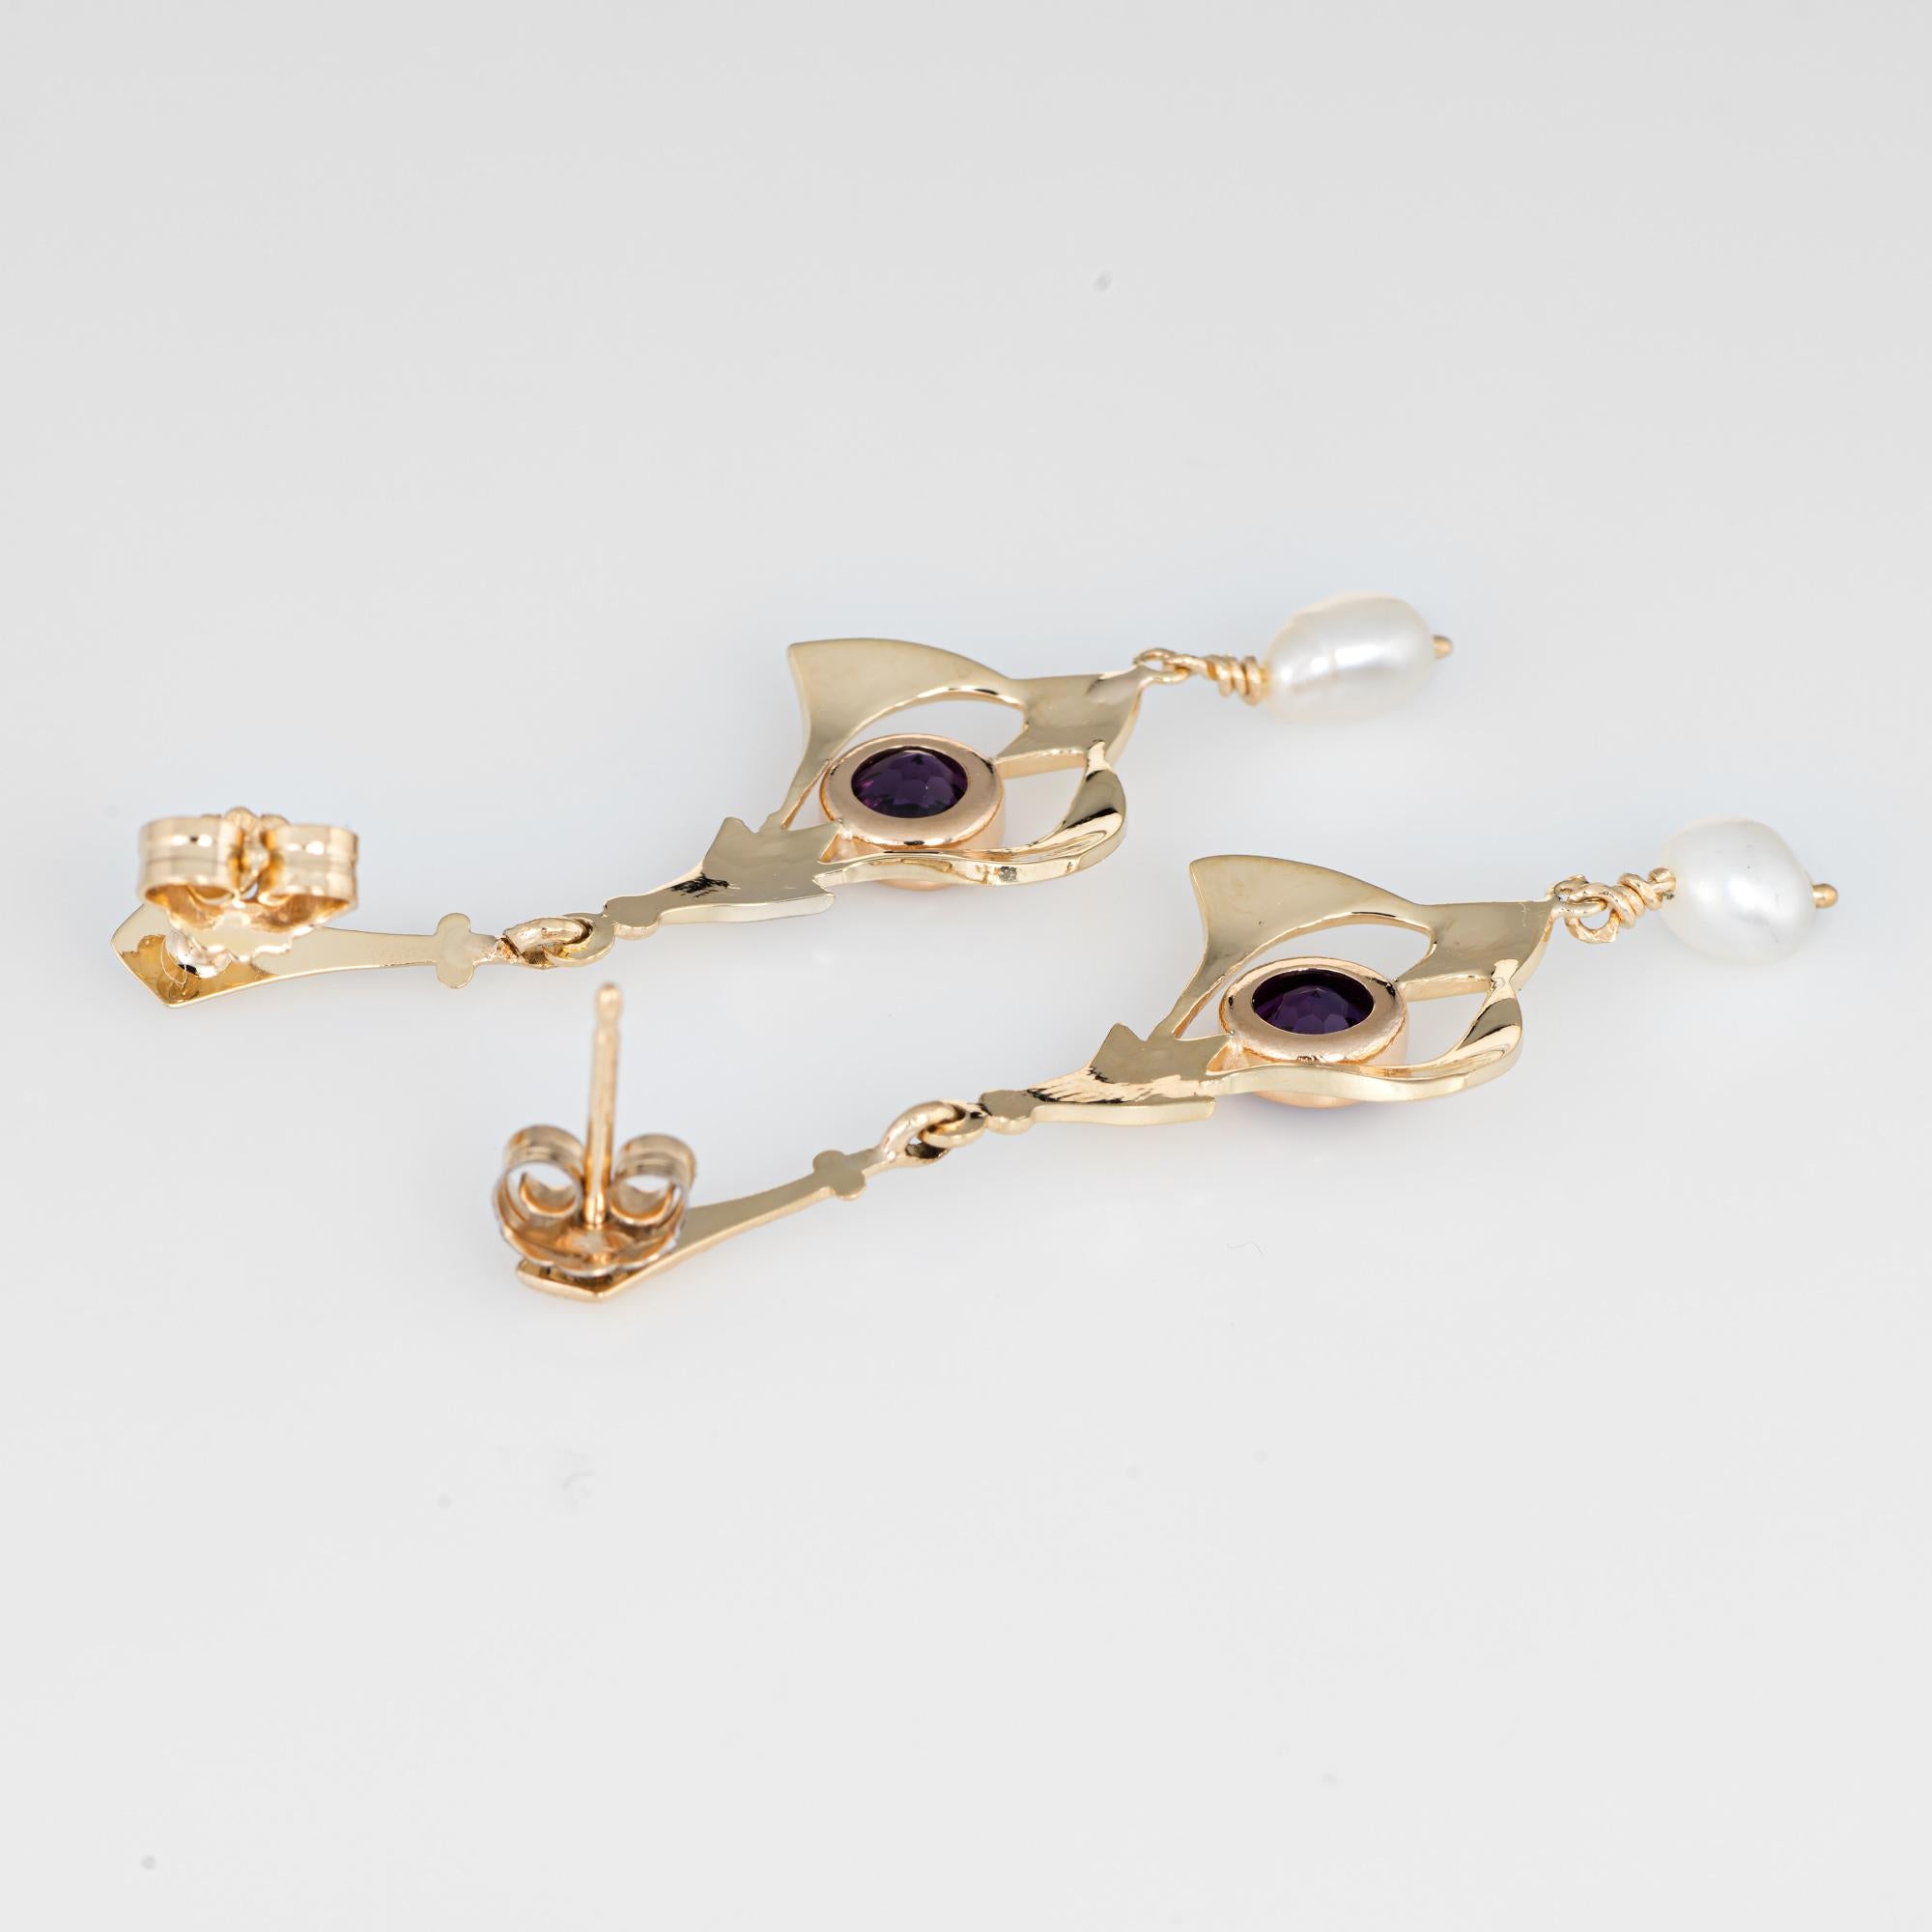 Elegant pair of vintage amethyst & freshwater pearl drop earrings crafted in 14k yellow gold. 

Two amethysts are estimated at 0.40 carats each (total estimated weight of at 0.80 carats), accented with two estimated 4.5mm freshwater pearls. The